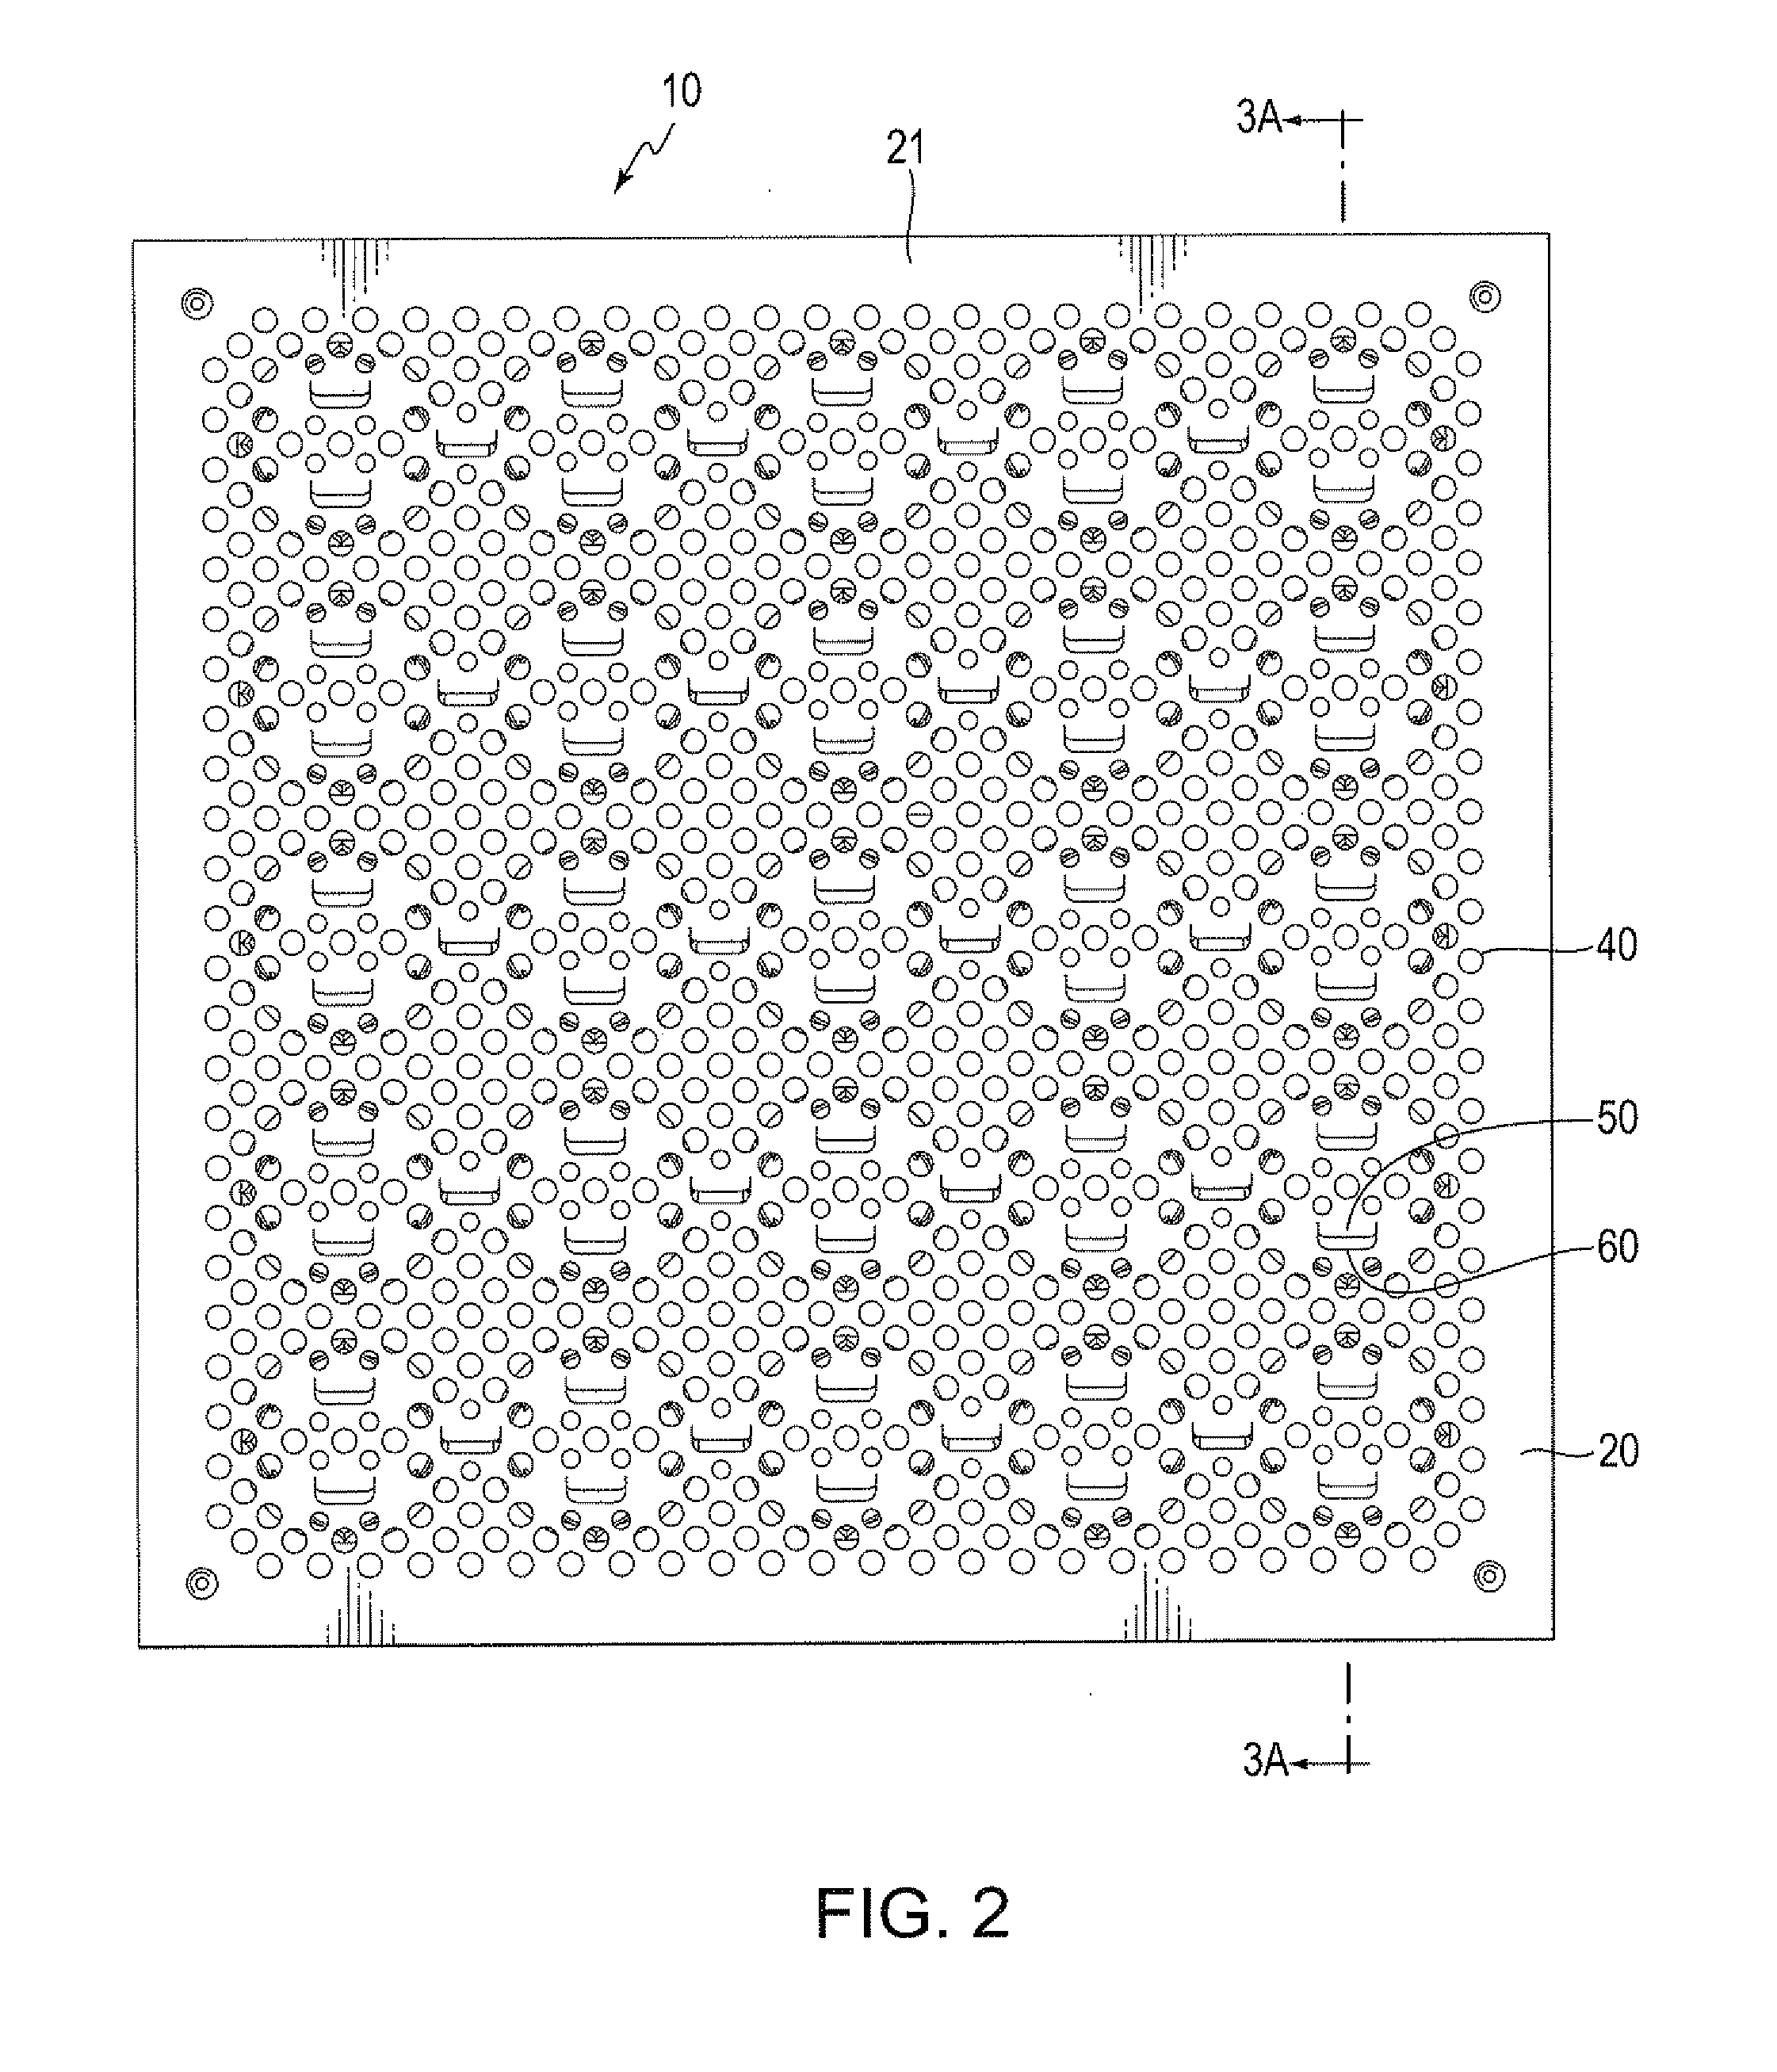 Access floor panel having intermingled directional and non-directional air passageways